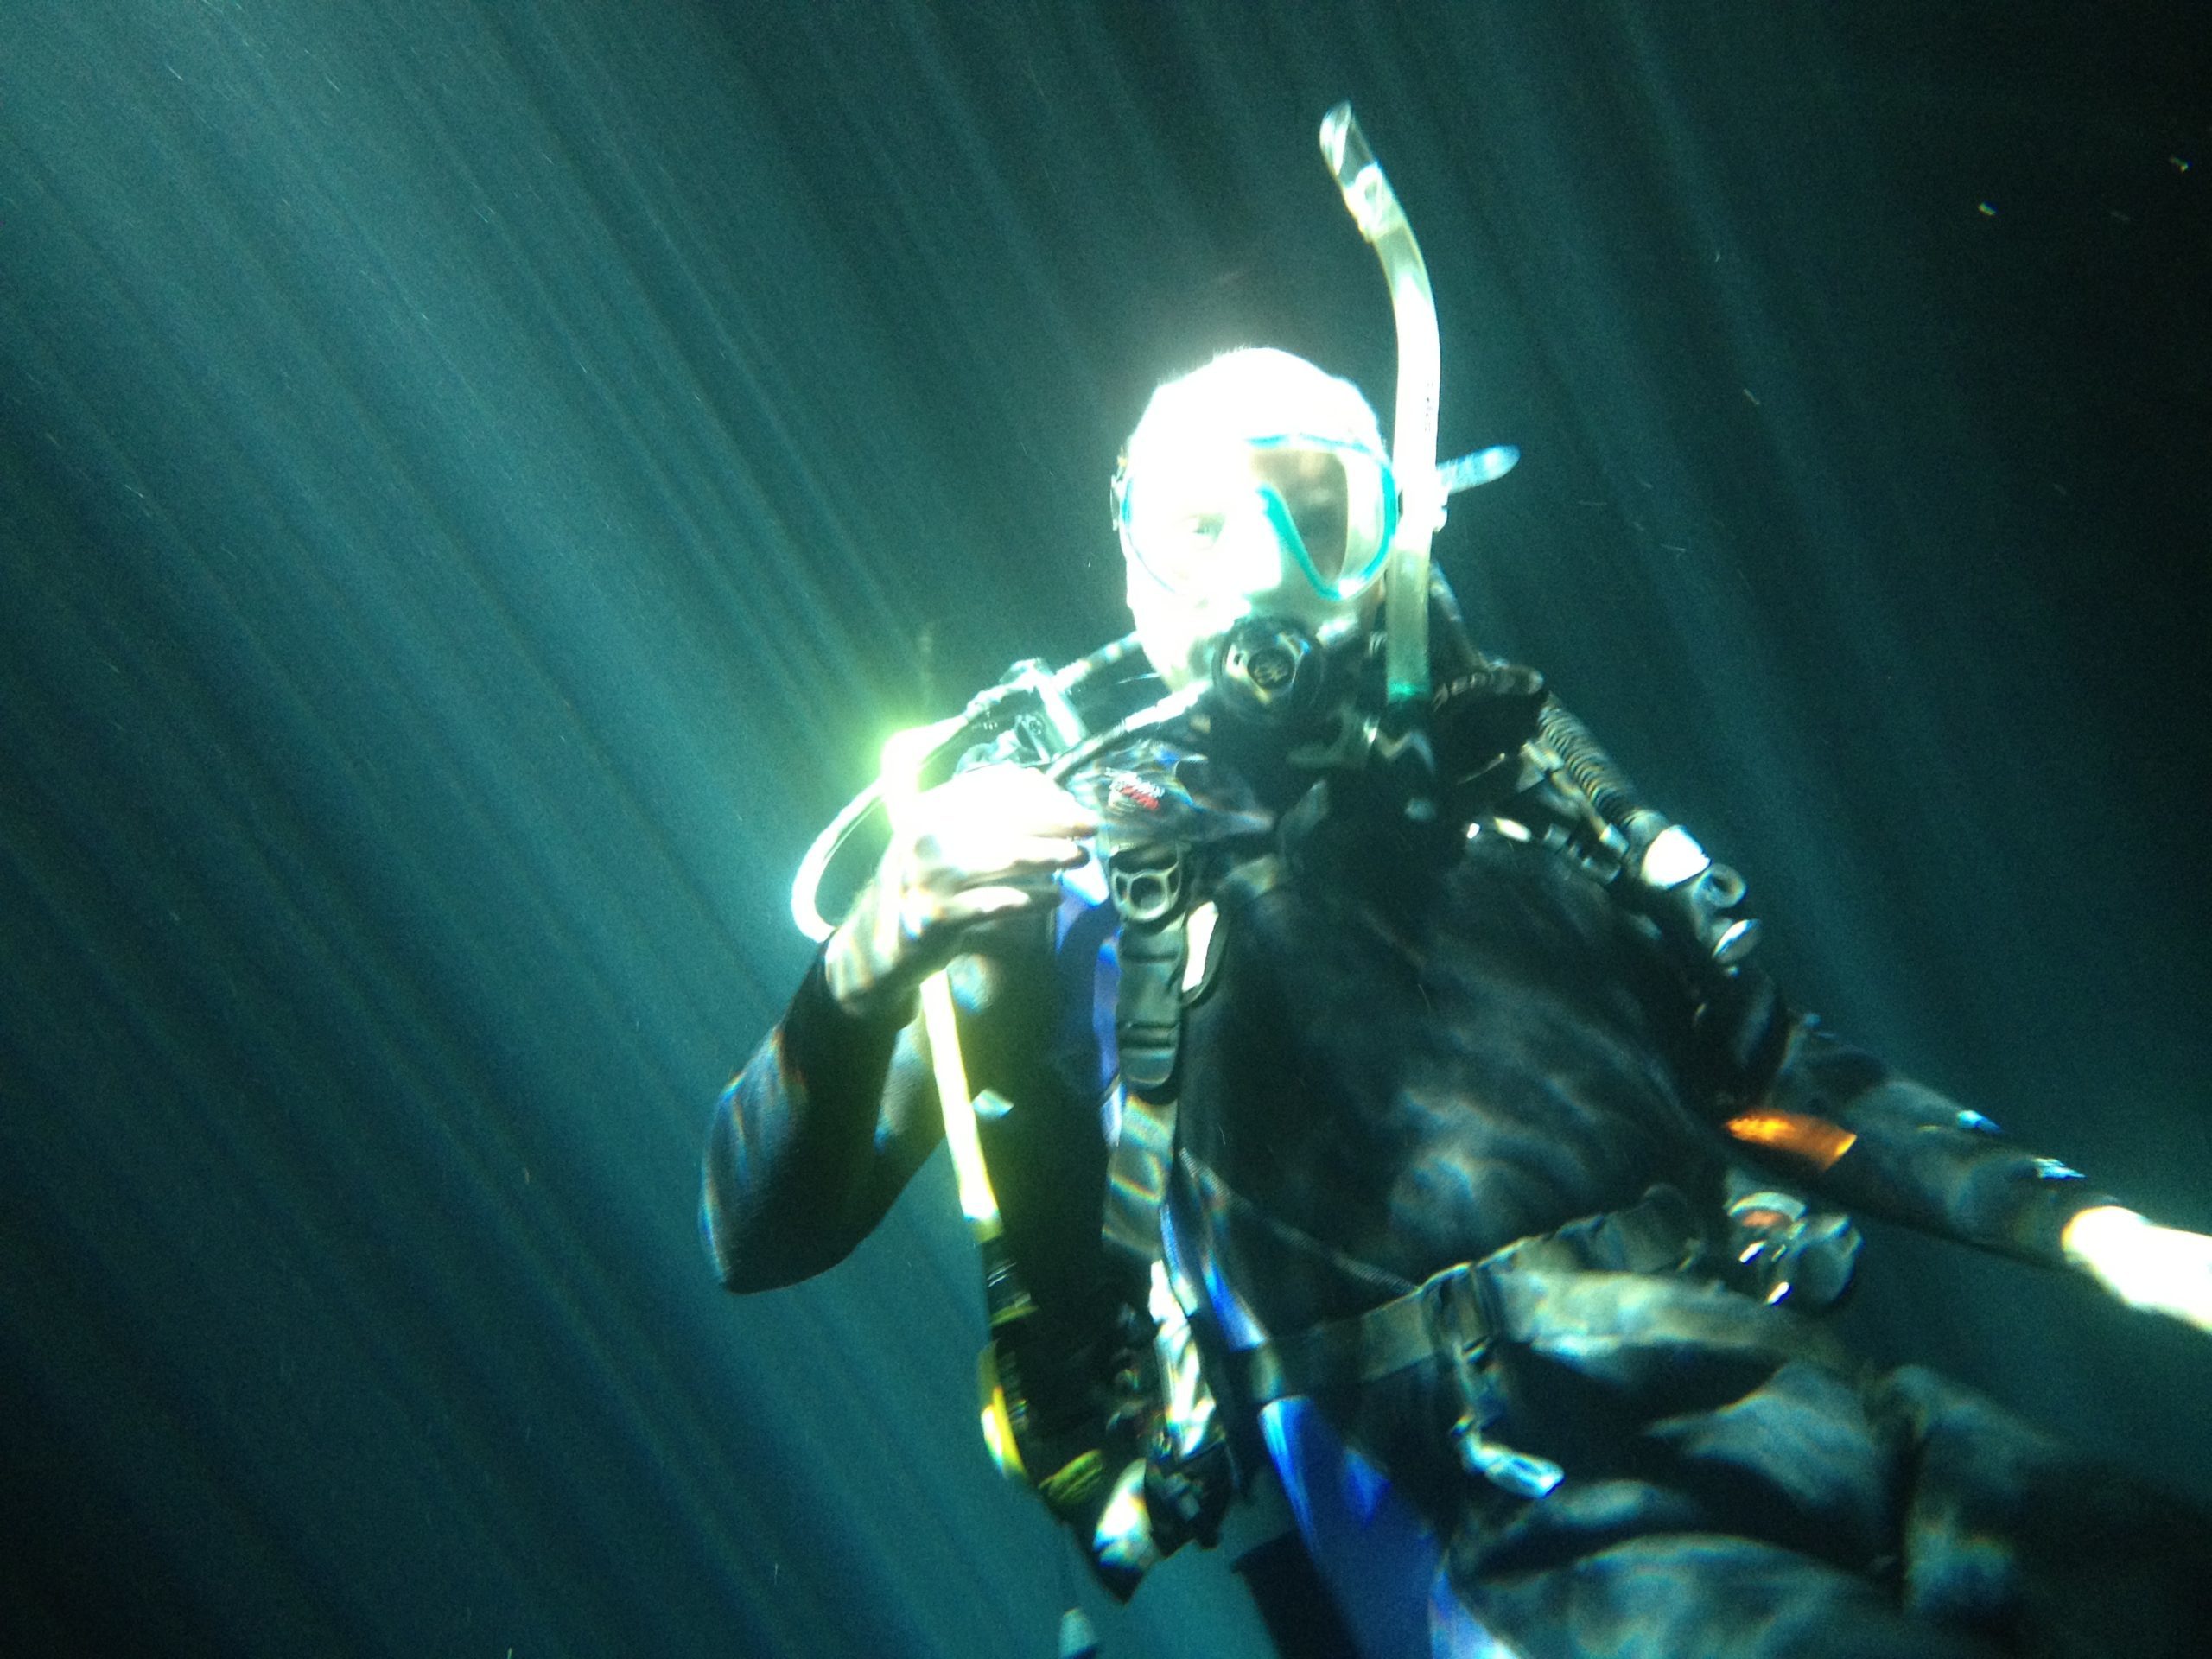 Patrick Symmes during final exam for Rescue Diver certification